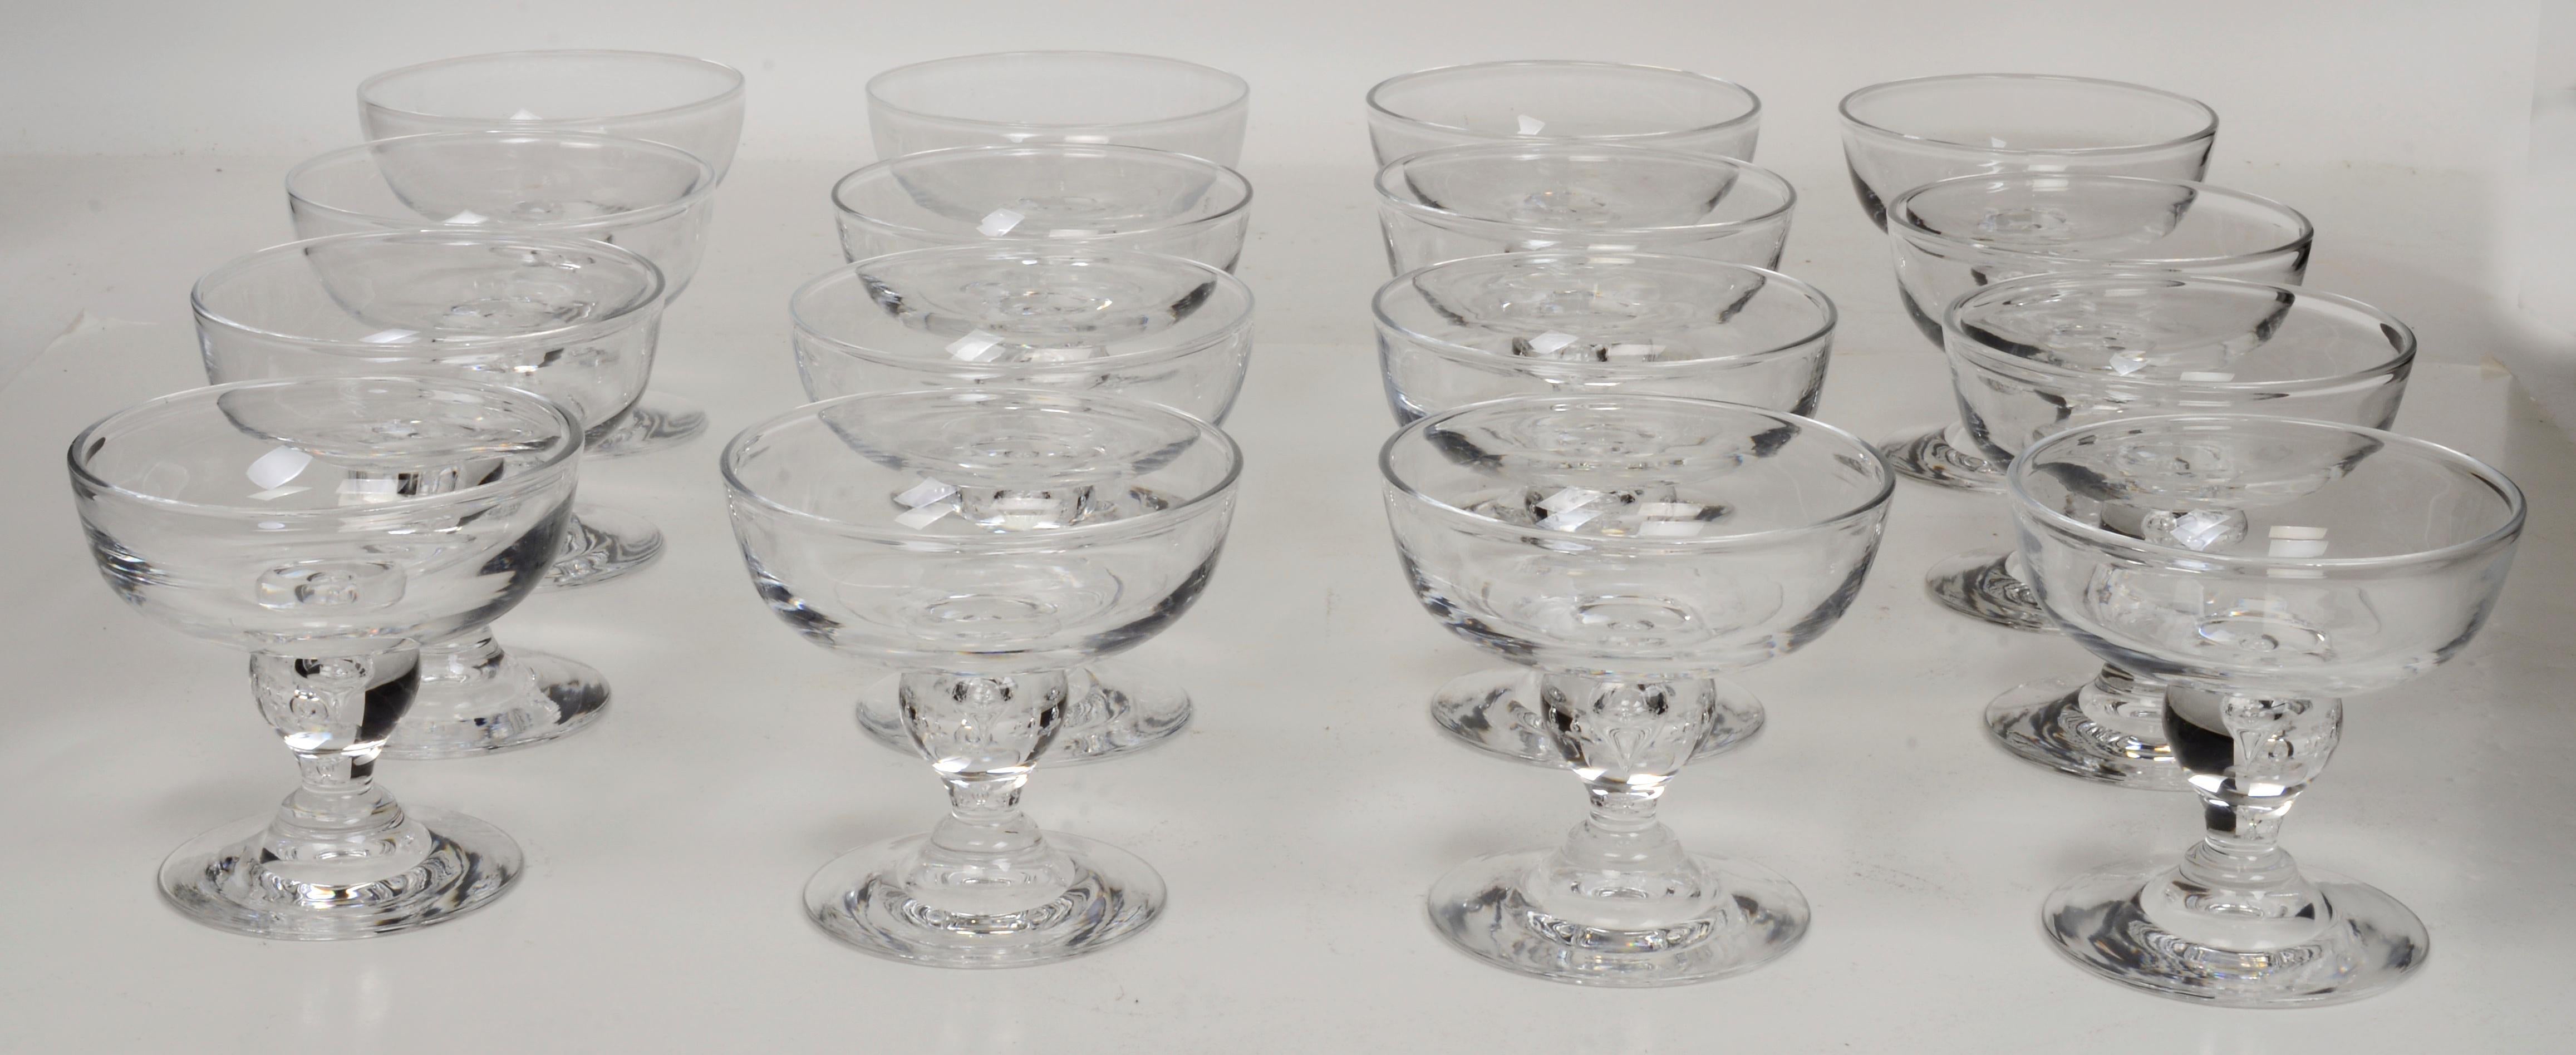 American Set of 16 George Thompson Designed Steuben Champagne/Coupe/Tall Sherbet Glasses For Sale